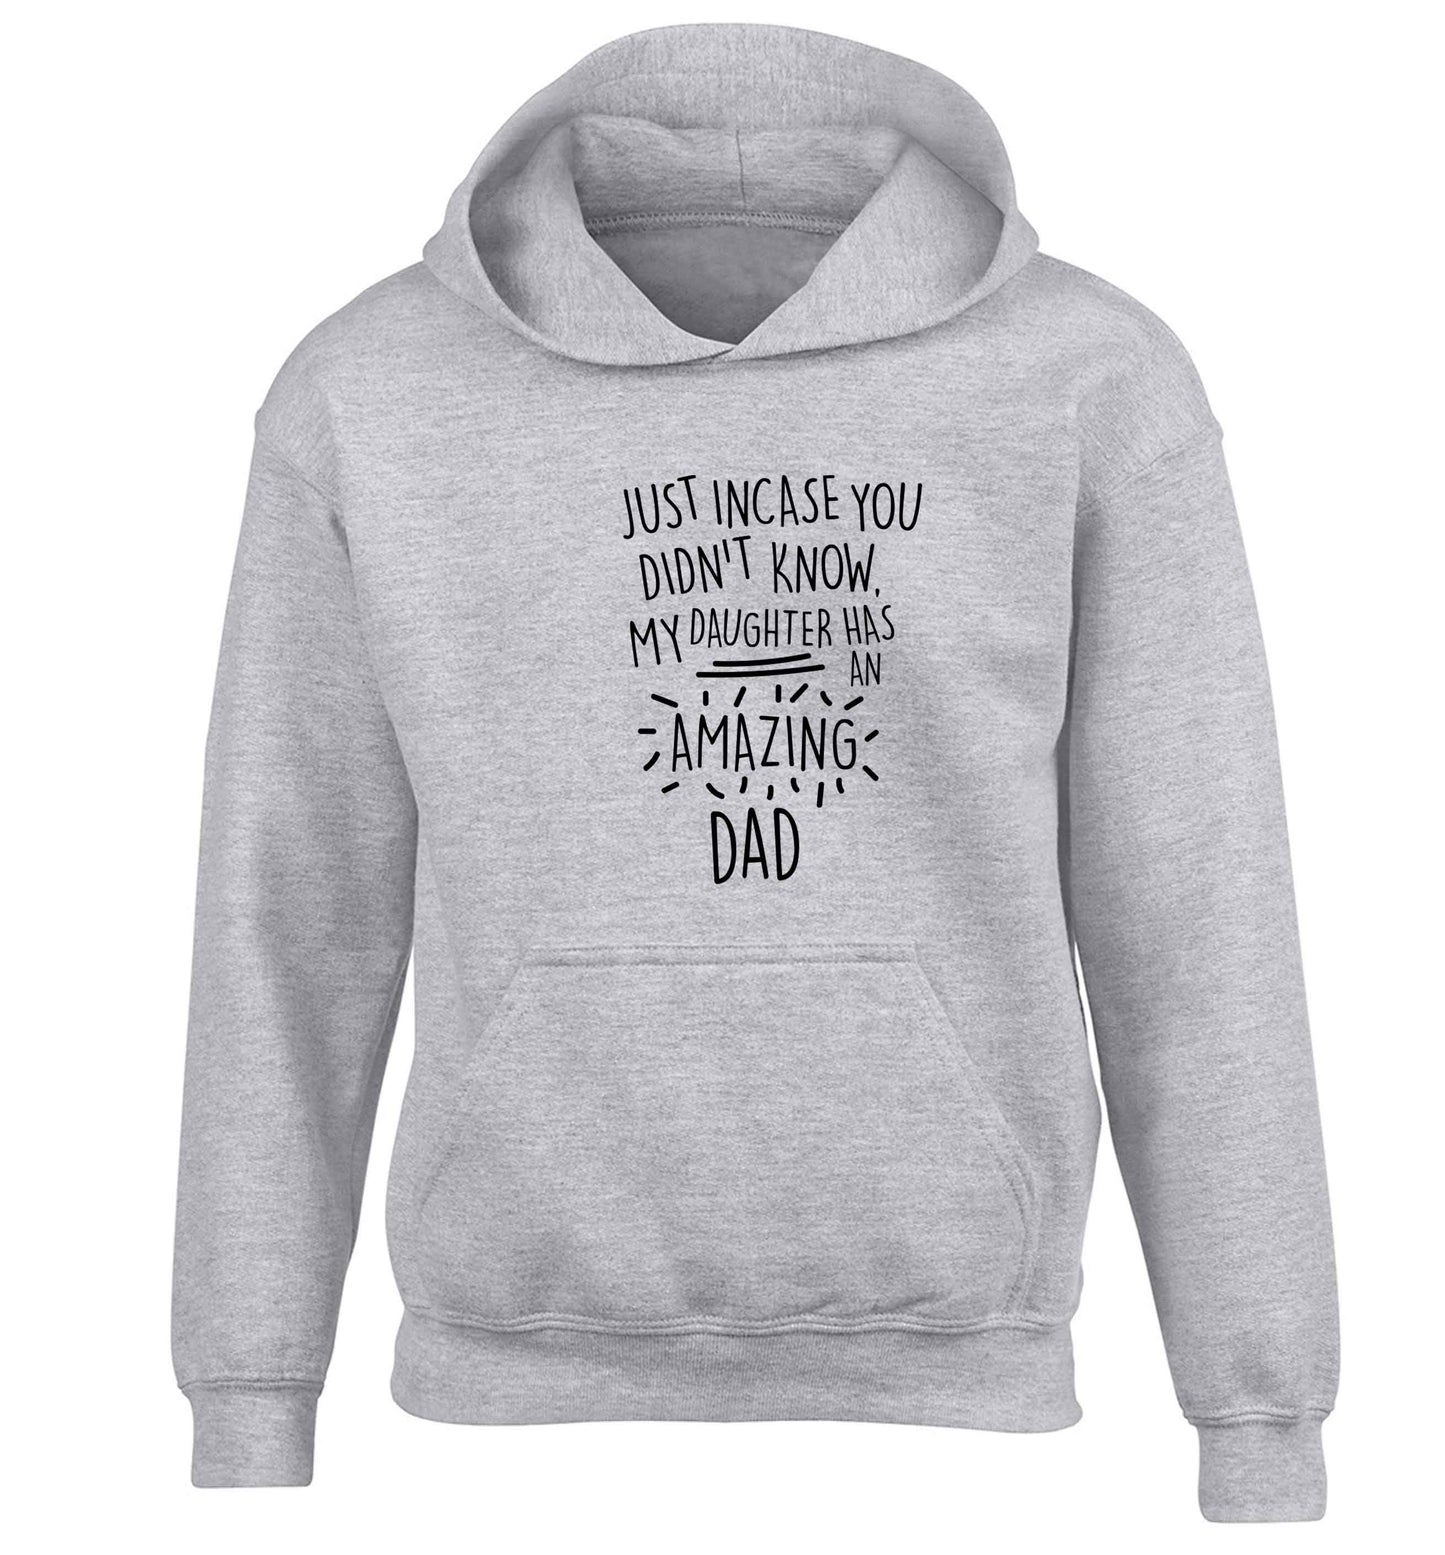 Just incase you didn't know my daughter has an amazing dad children's grey hoodie 12-13 Years